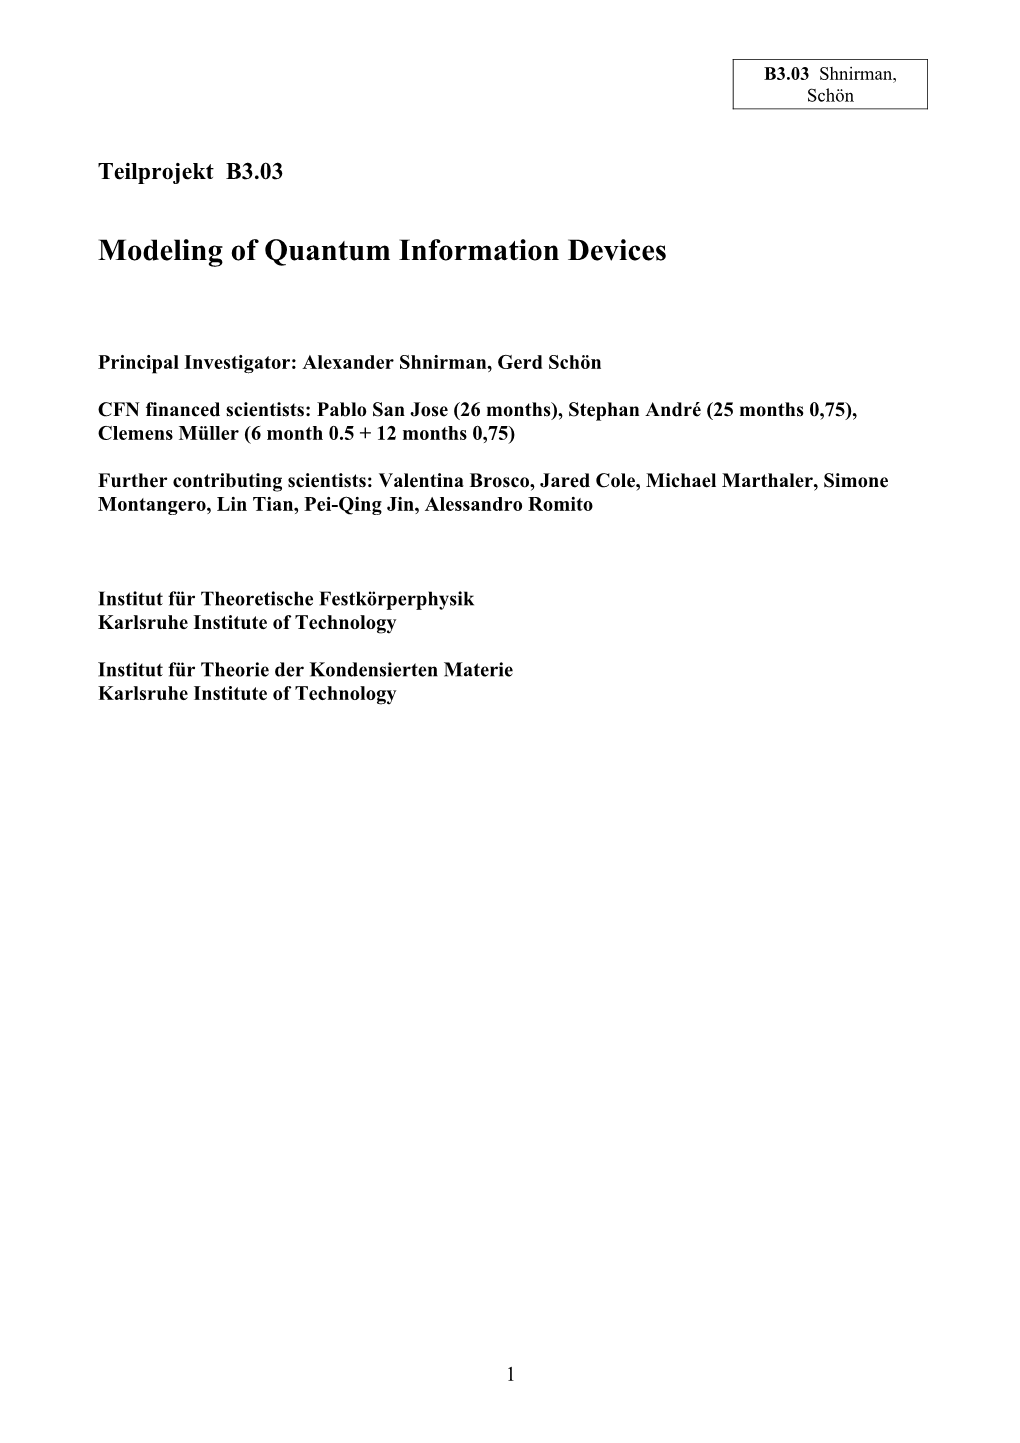 Modeling of Quantum Information Devices